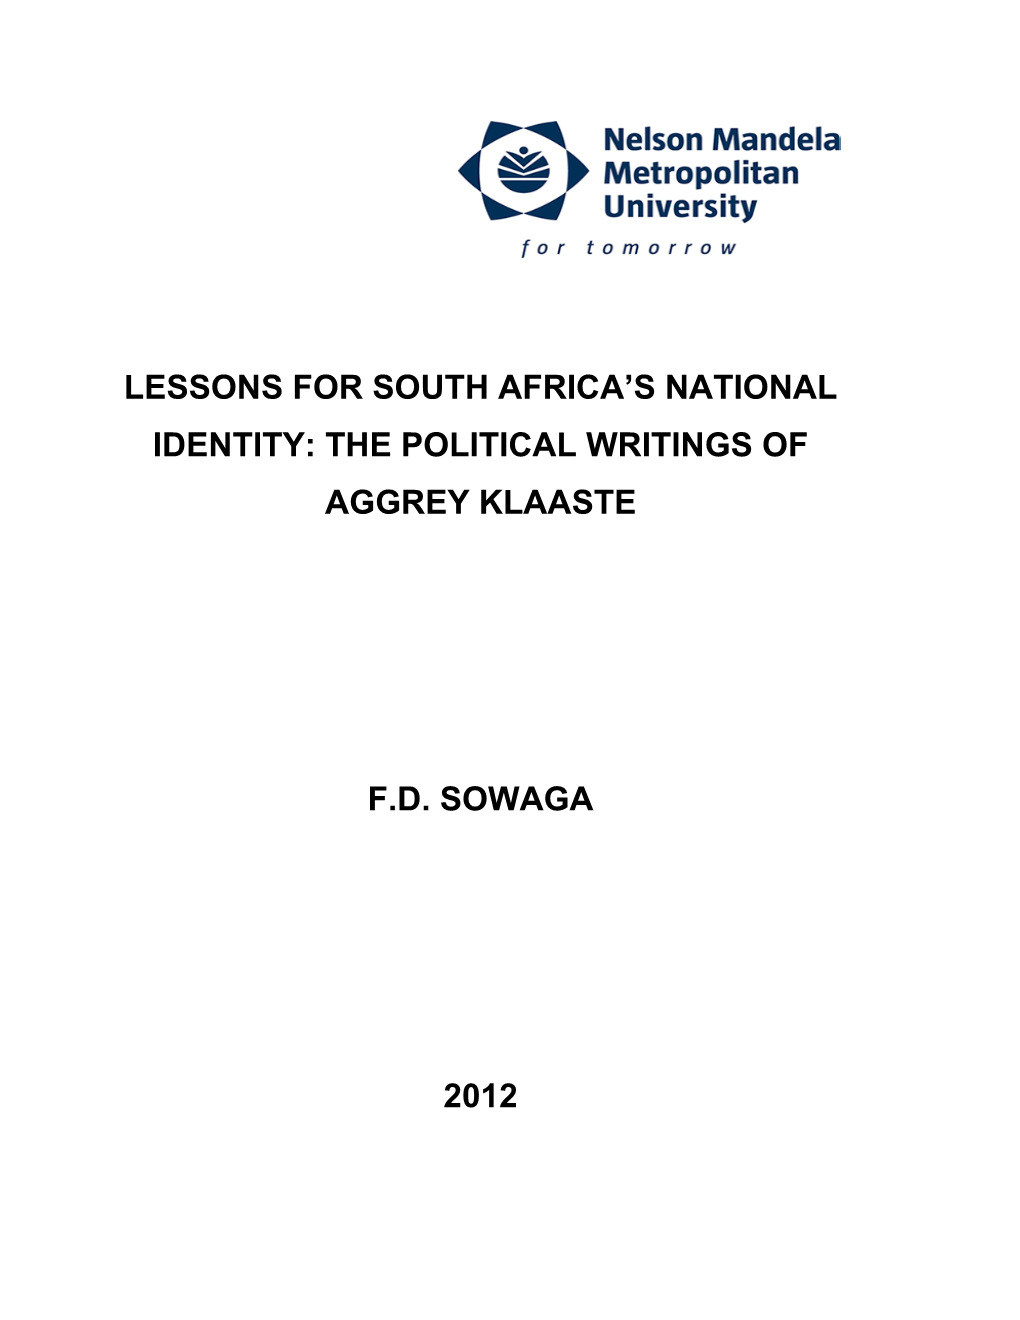 Lessons for South Africa's National Identity: The